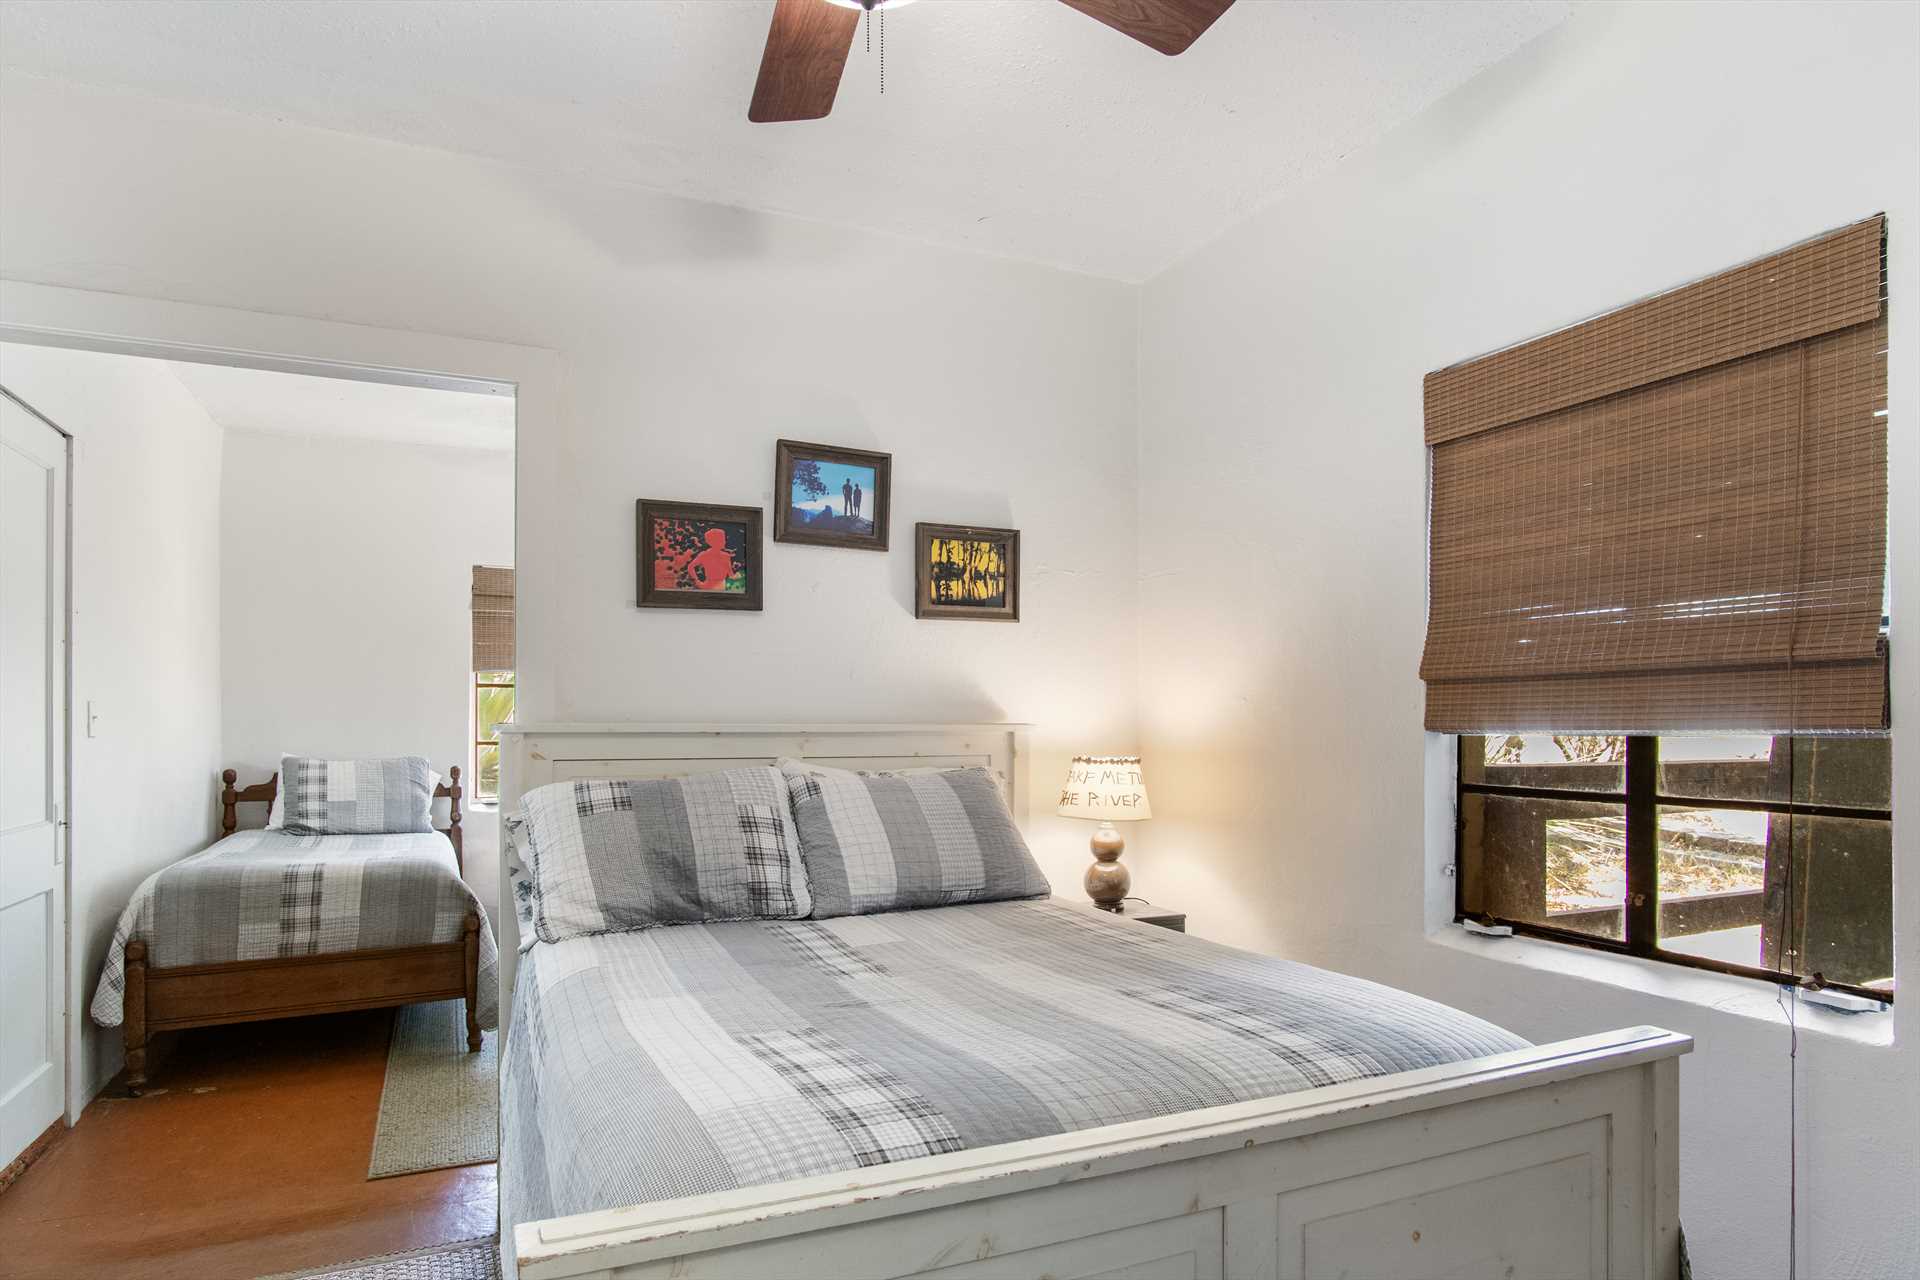                                                 There's a multiple bed setup in the fourth bedroom, with one double and two twin beds, all covered with clean linens.